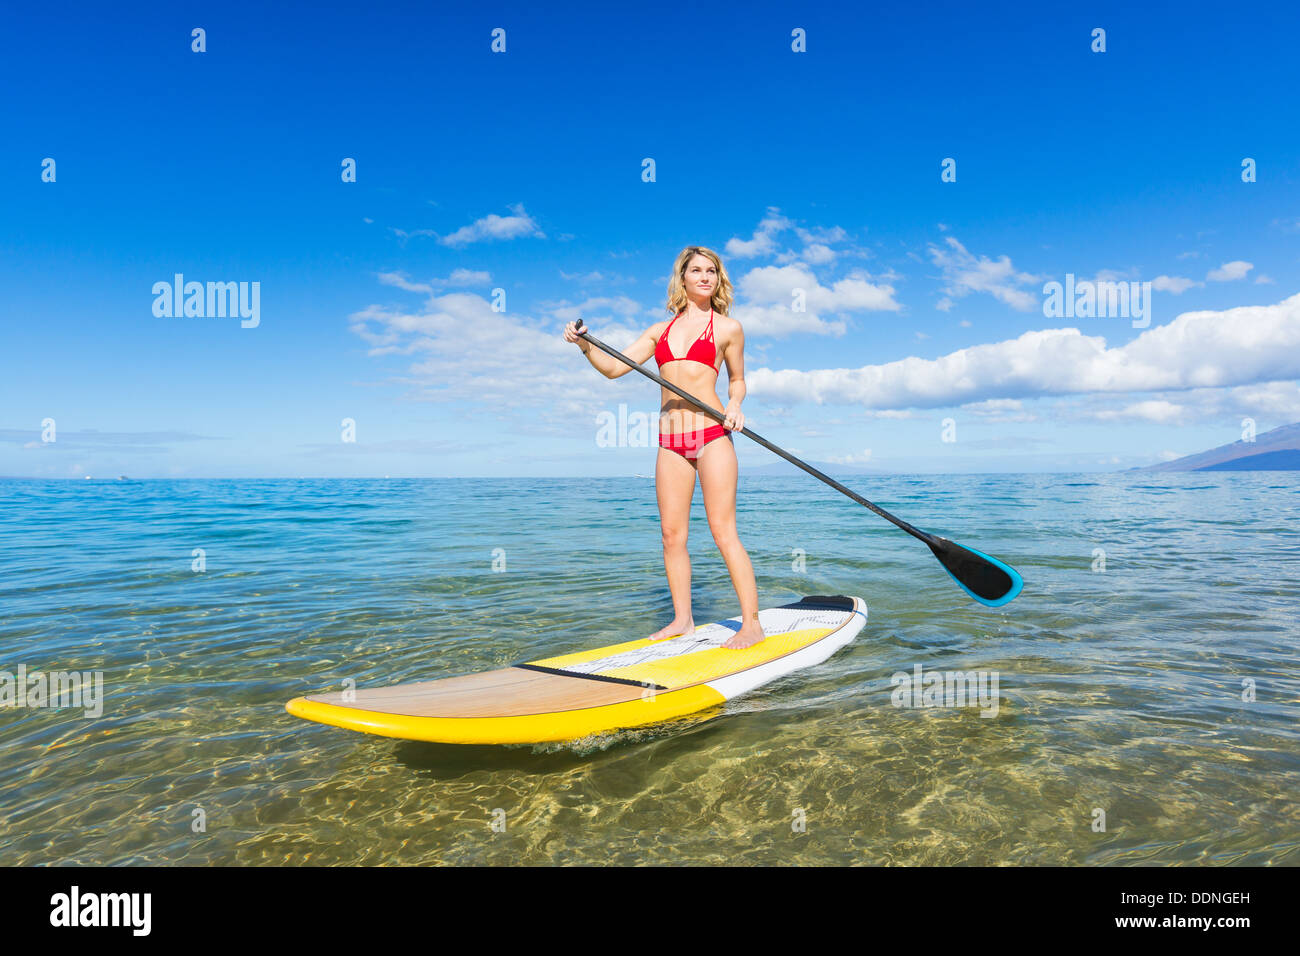 Attractive Woman on Stand Up Paddle Board, SUP, Tropical Blue Ocean, Hawaii Stock Photo